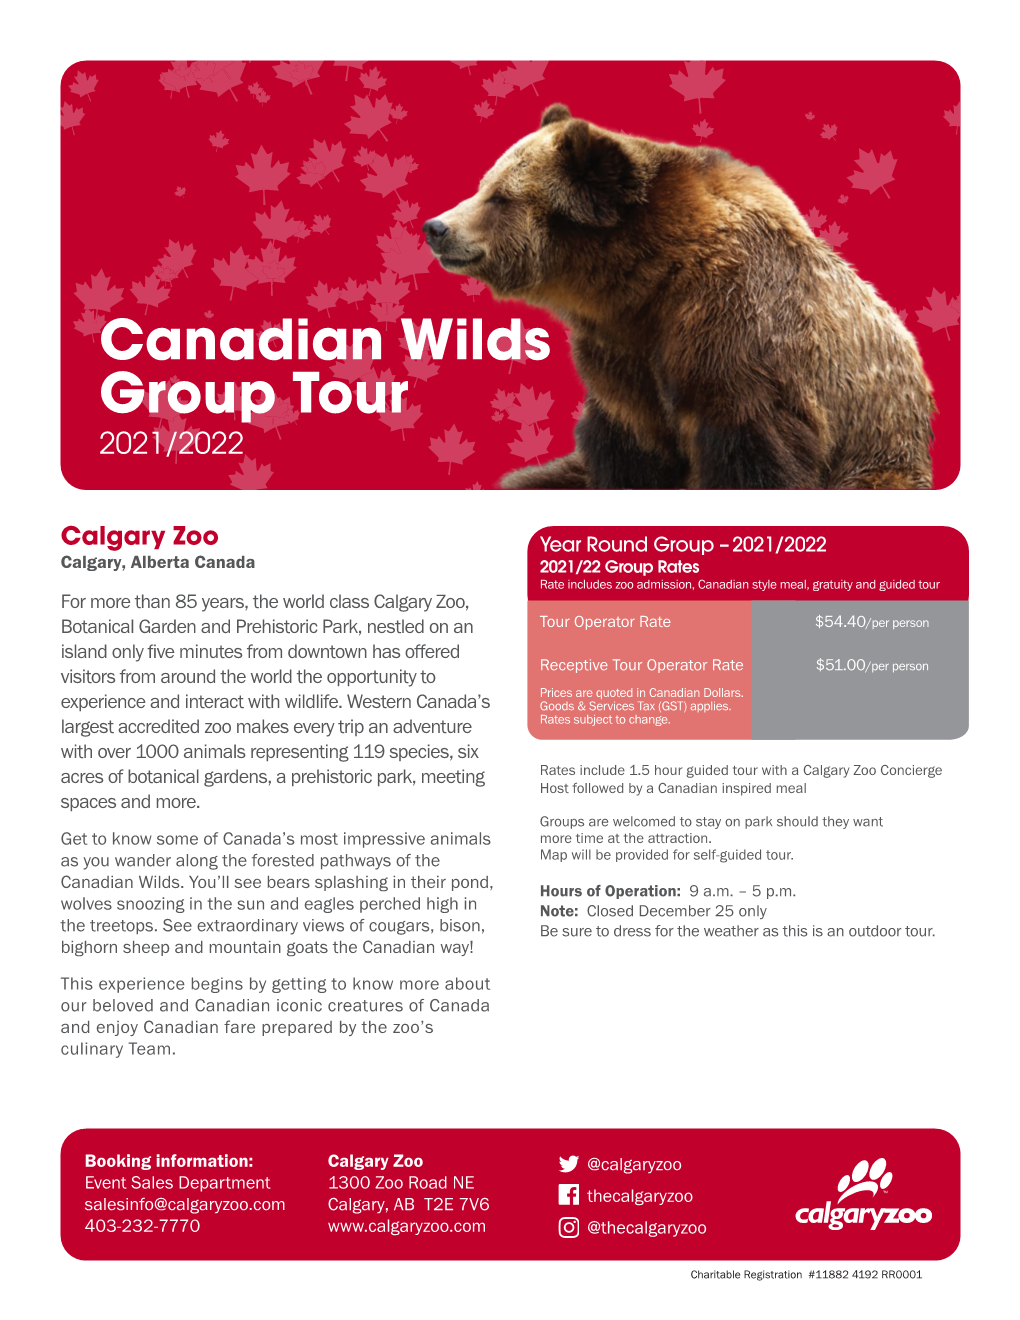 Canadian Wilds Group Tour 2021/2022